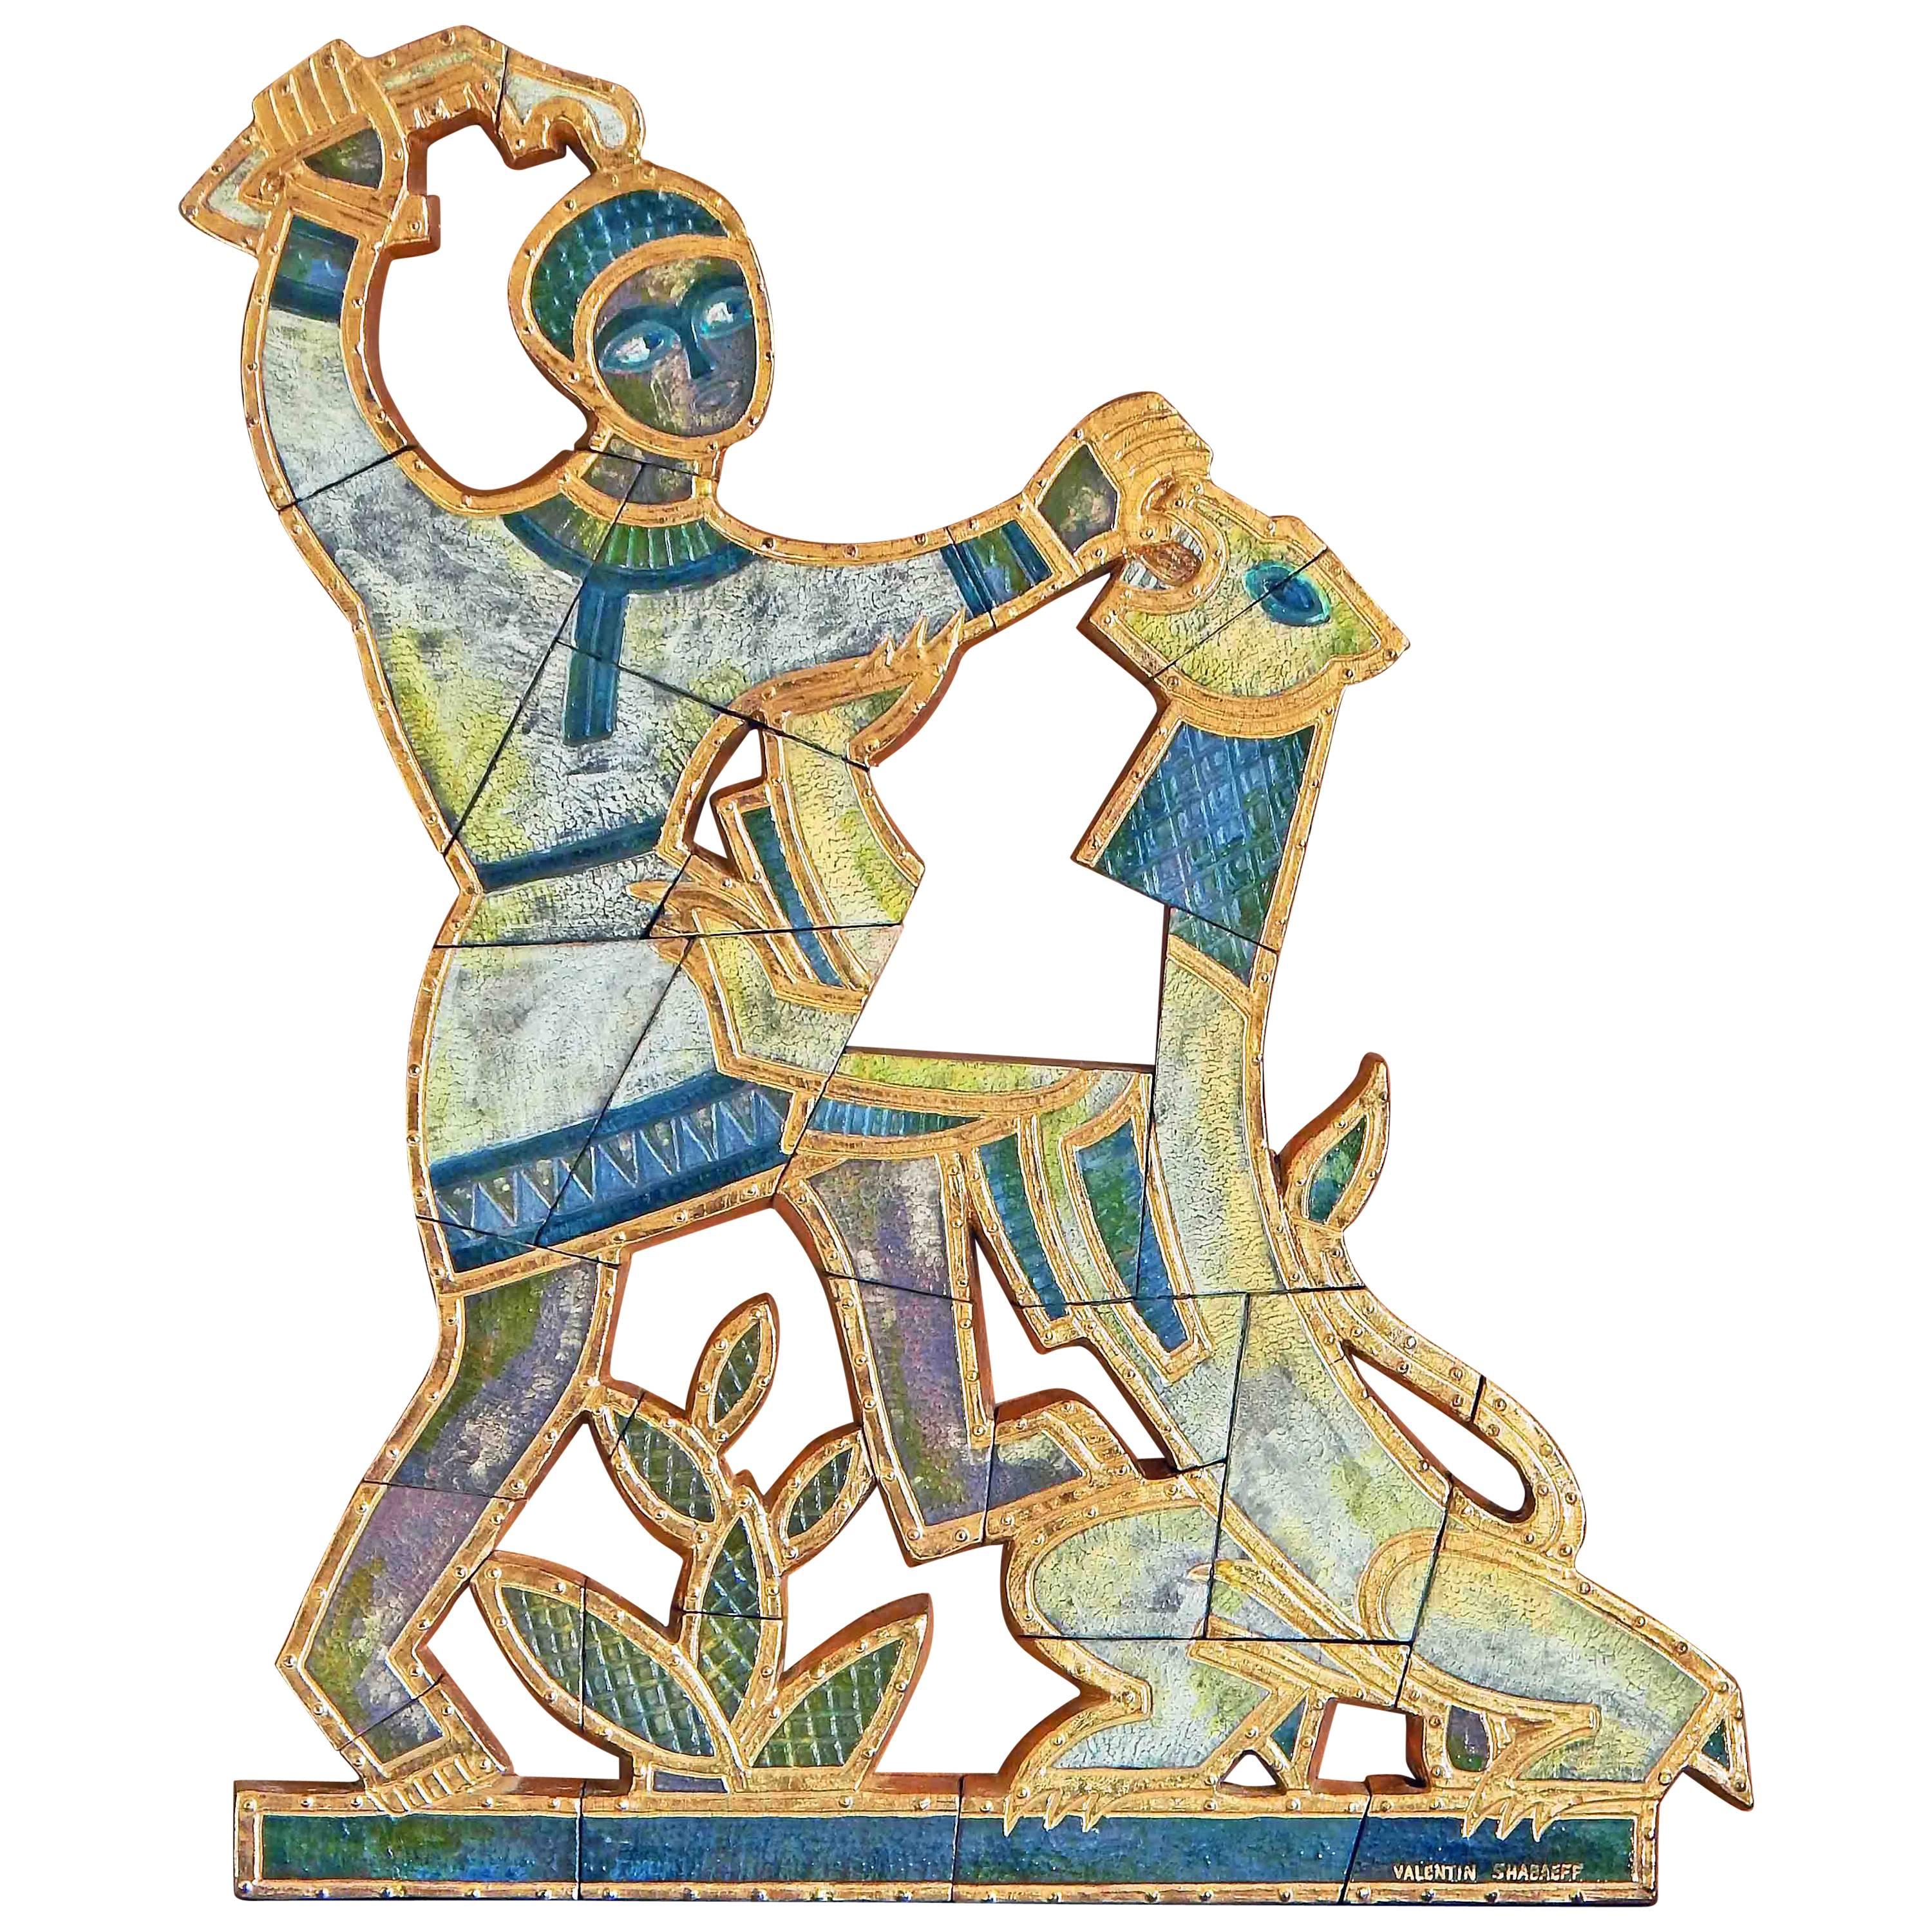 A tour de force example of Art Deco wall sculpture, this depiction of Samson slaying the lion was made by Valentin Shabaeff, a Russian-Canadian artist who settled in Montreal. Shabaeff became known for bas relief sculptures executed in ceramic,